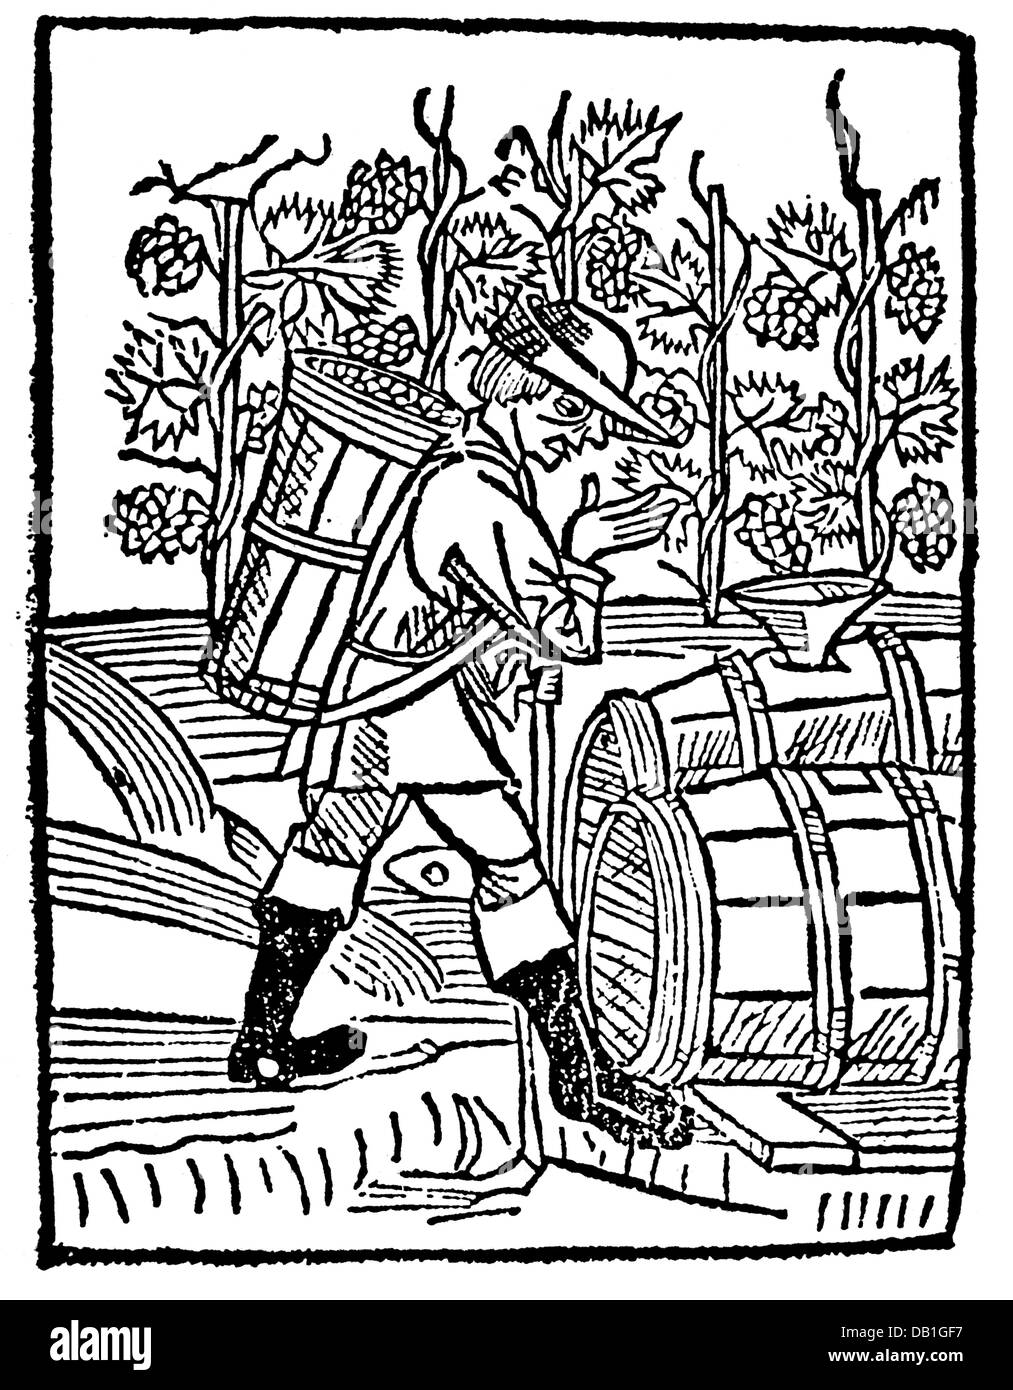 agriculture, viticulture, grape gathering, wine-grower with basket and wine casks, woodcut, out of: Wilhelm von Hirnkofen, 'Von der beraytung vnd brauchung der wein', Ulm, 1499, Additional-Rights-Clearences-Not Available Stock Photo